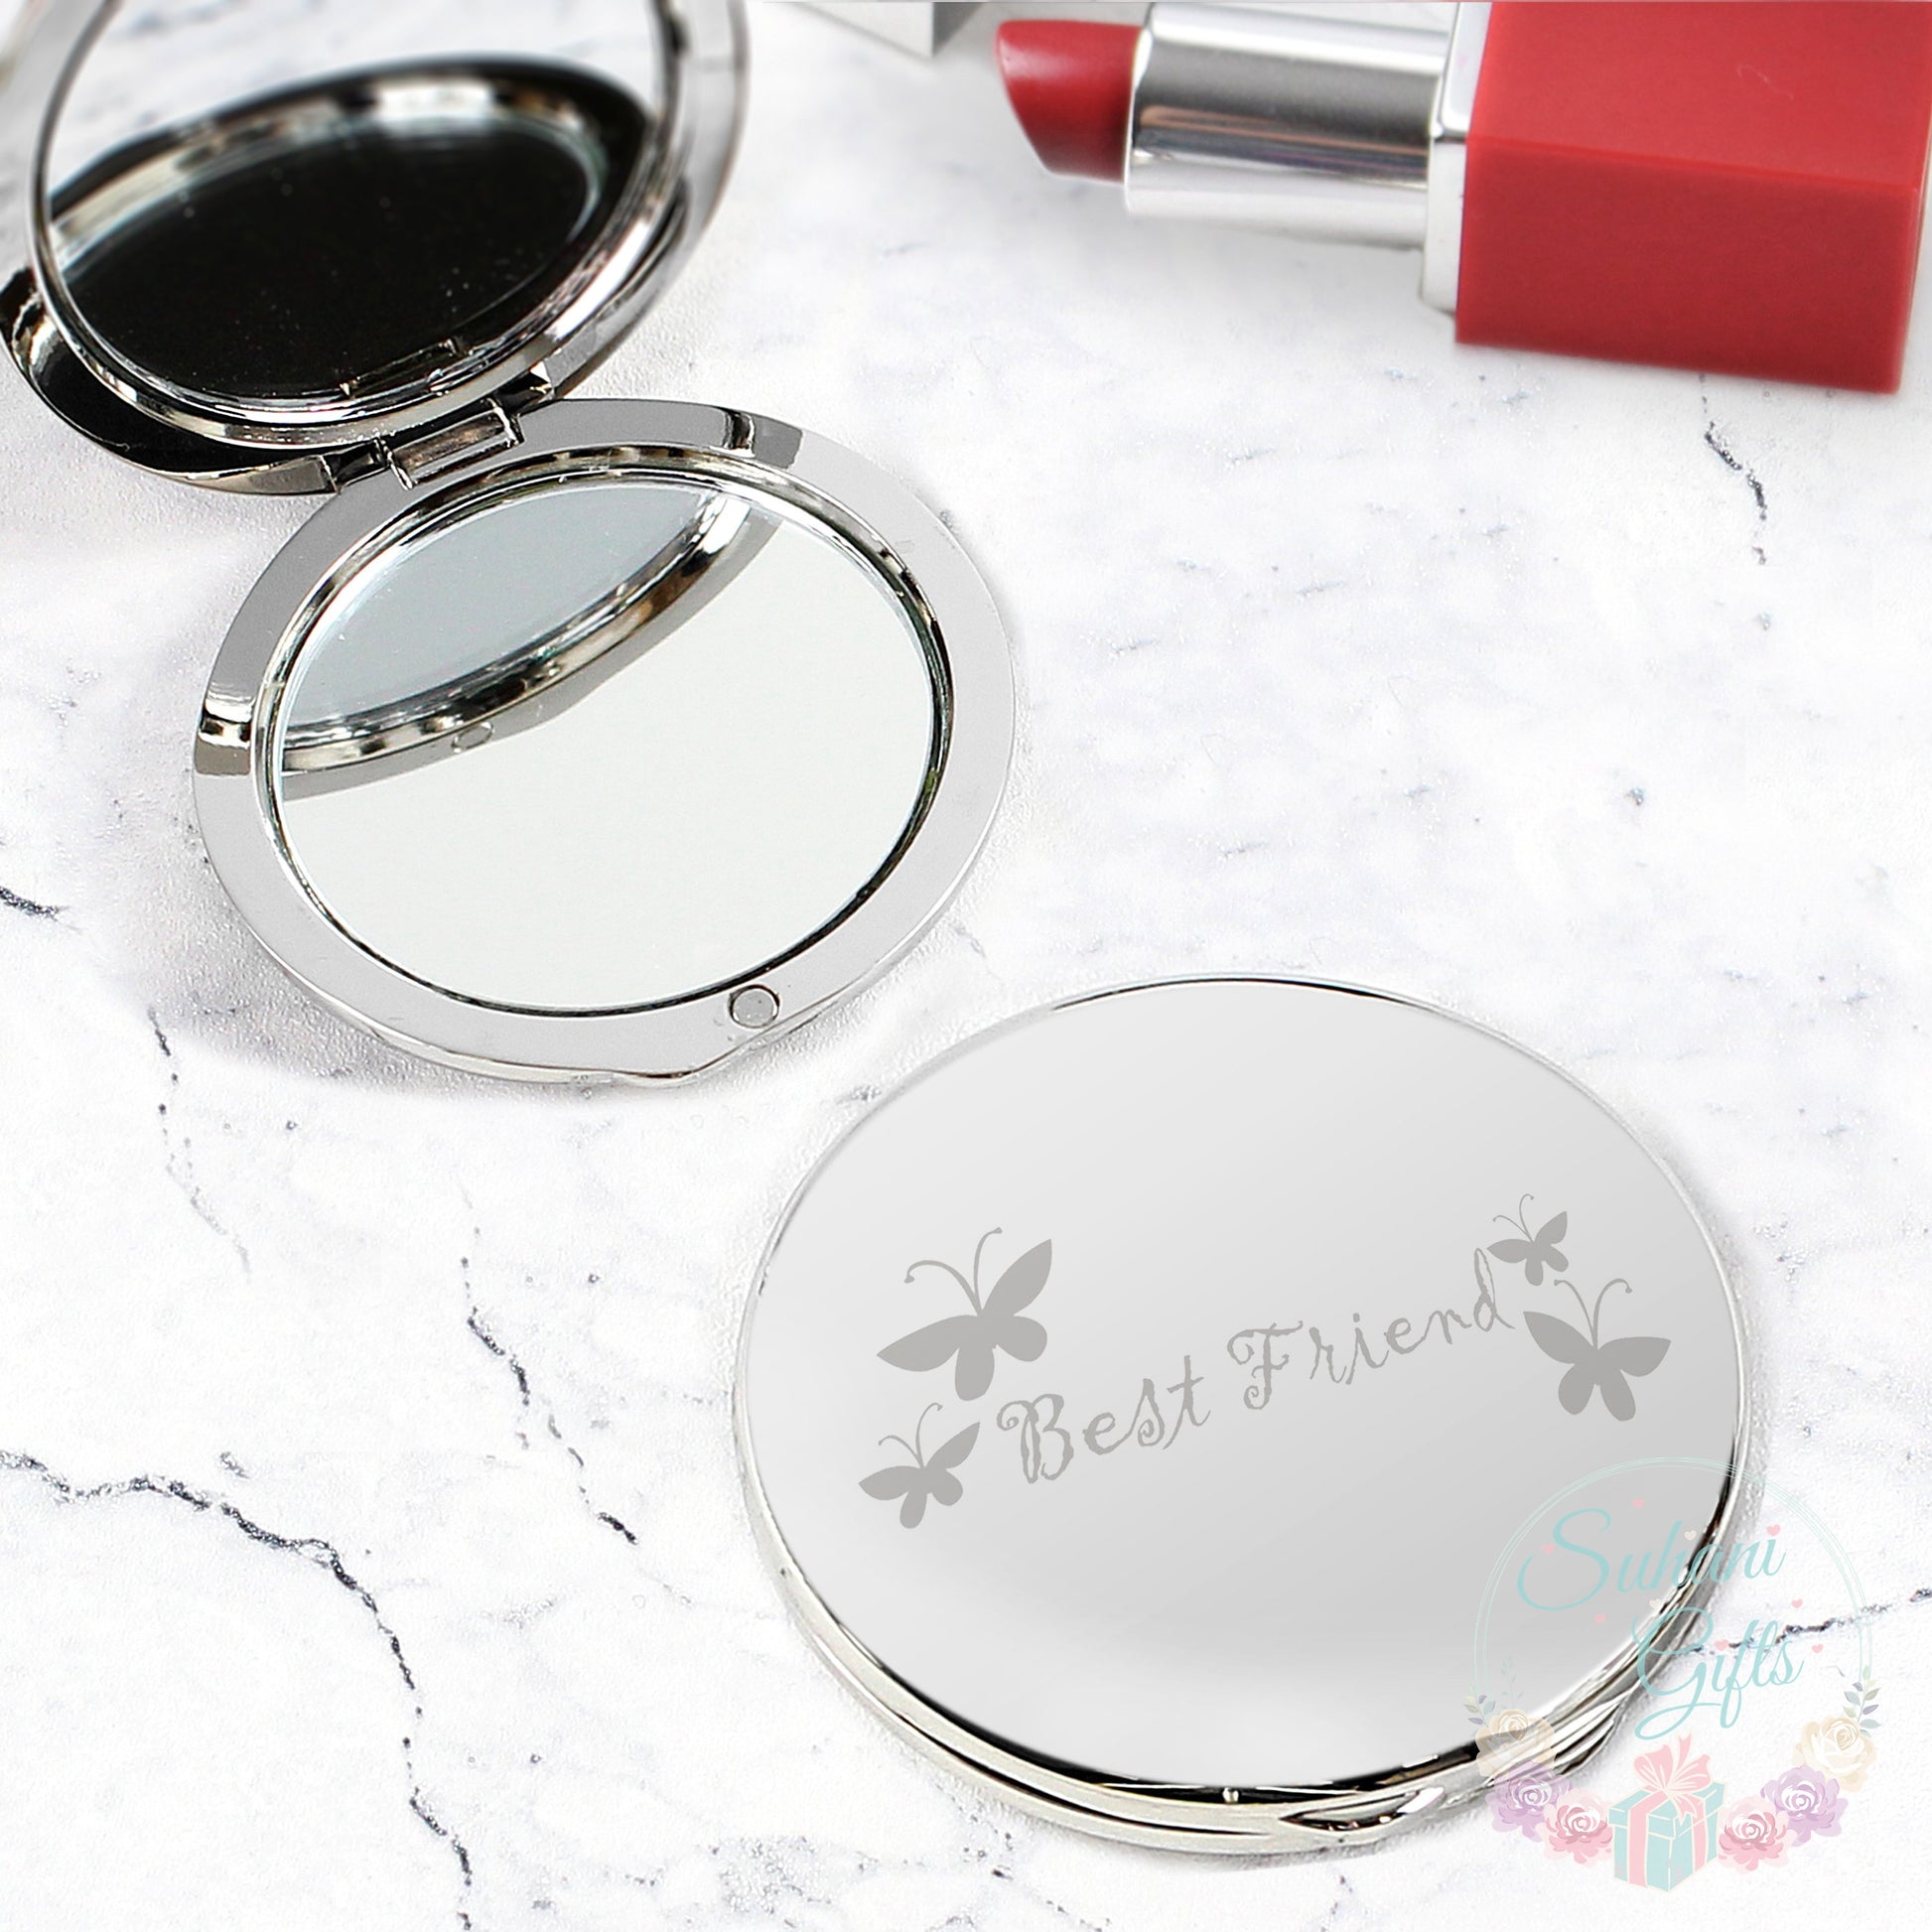 Best Friend Round Compact Mirror - Suhani Gifts